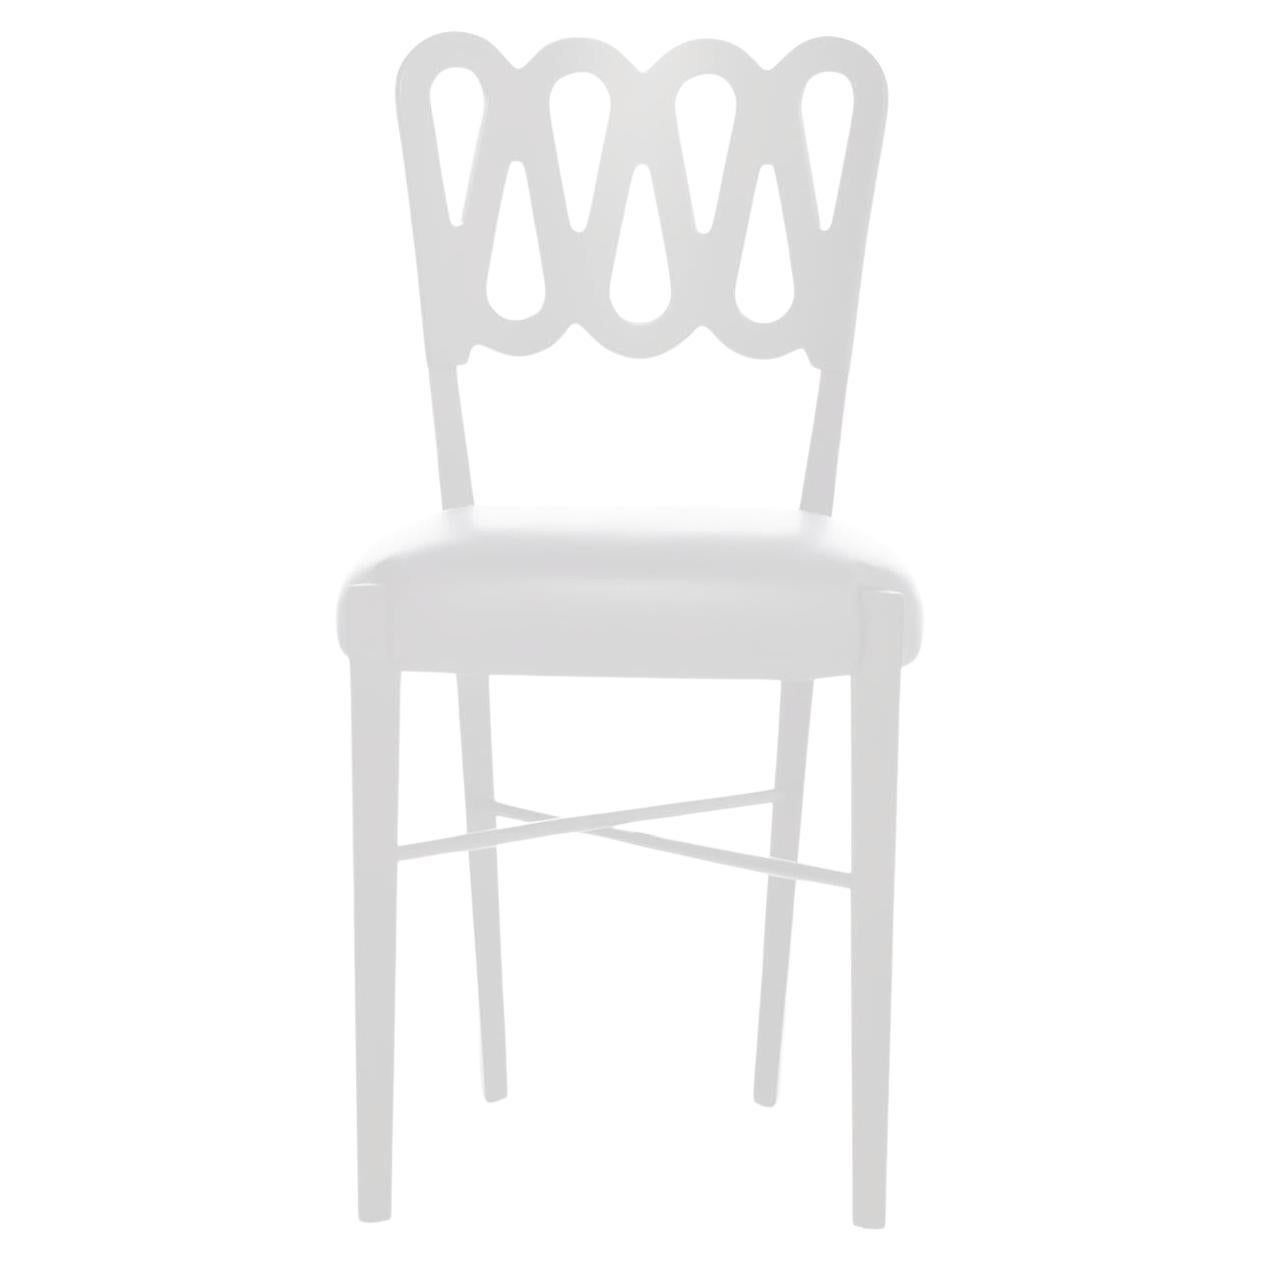 Ponti 969 White Leather Chair By Go Ponti For Sale